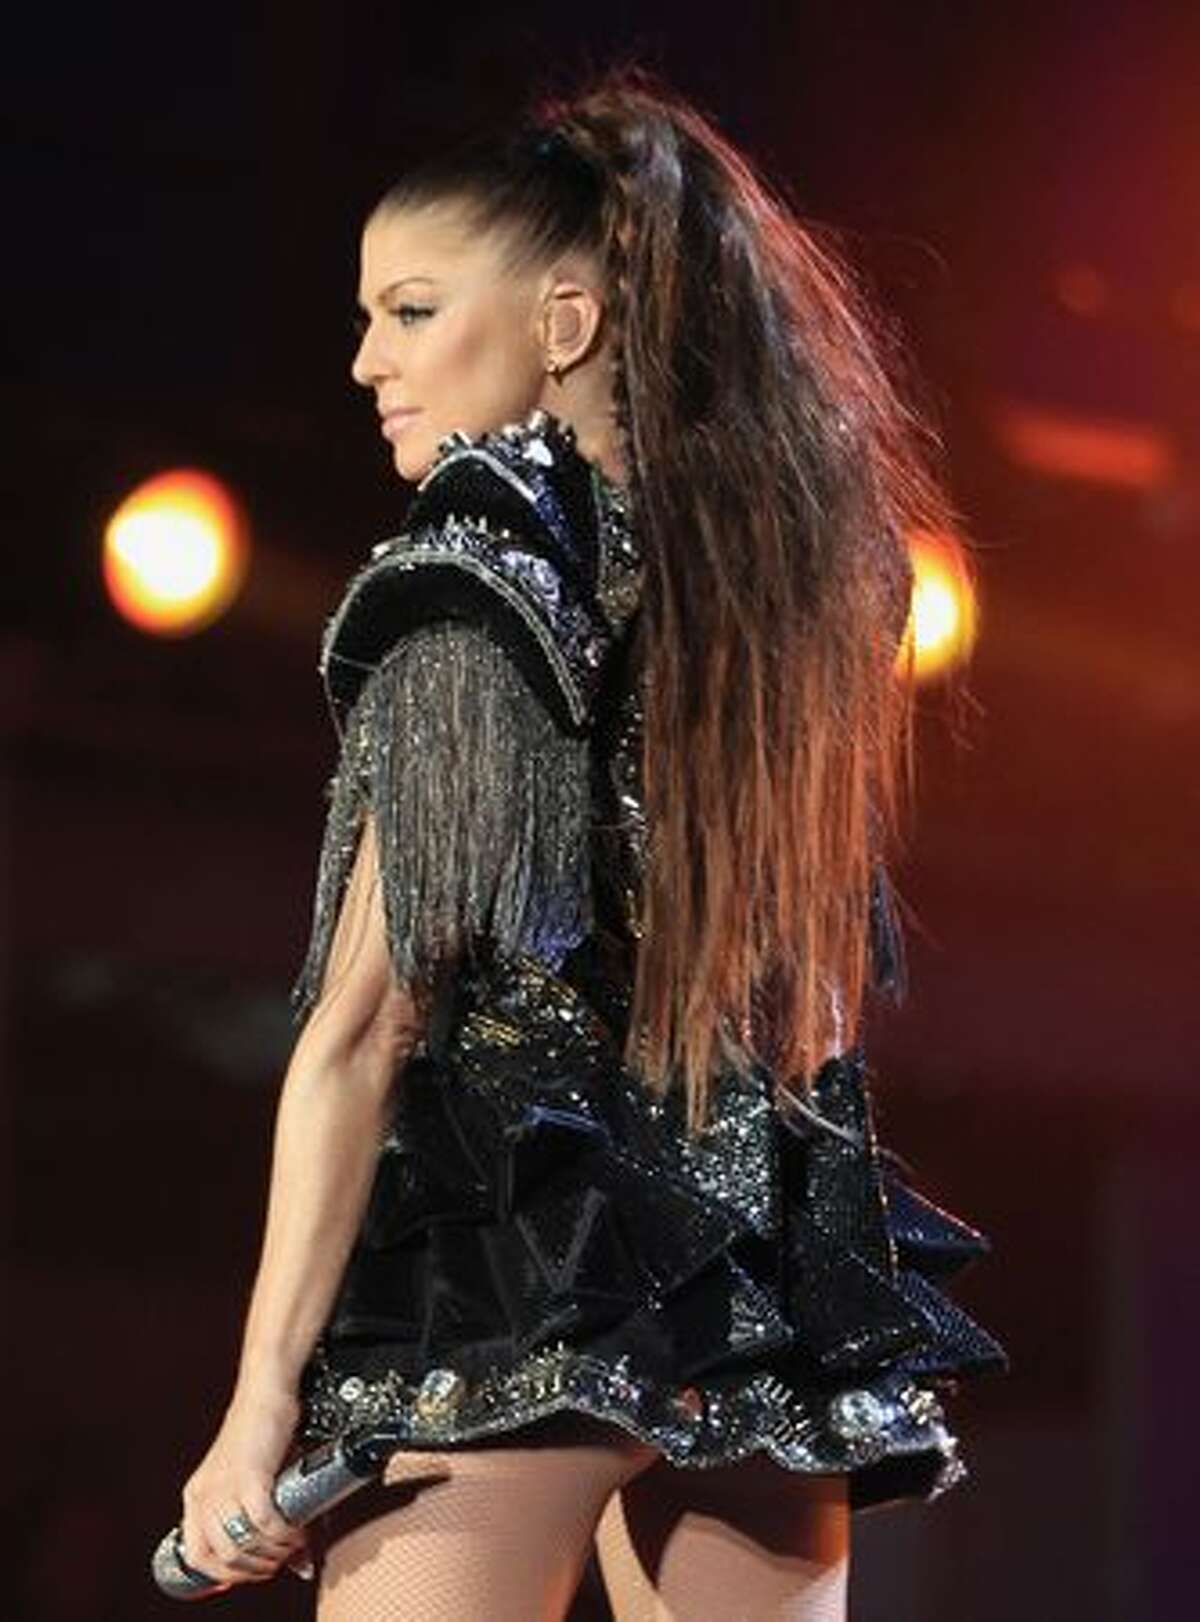 Fergie of Black Eyed Peas performs a song during the kick-off celebration concert for the 2010 FIFA World Cup at the Orlando Stadium in Soweto, South Africa on Thursday, June 10, 2010. The world championship of soccer opens in South Africa on Friday and runs through July 11.